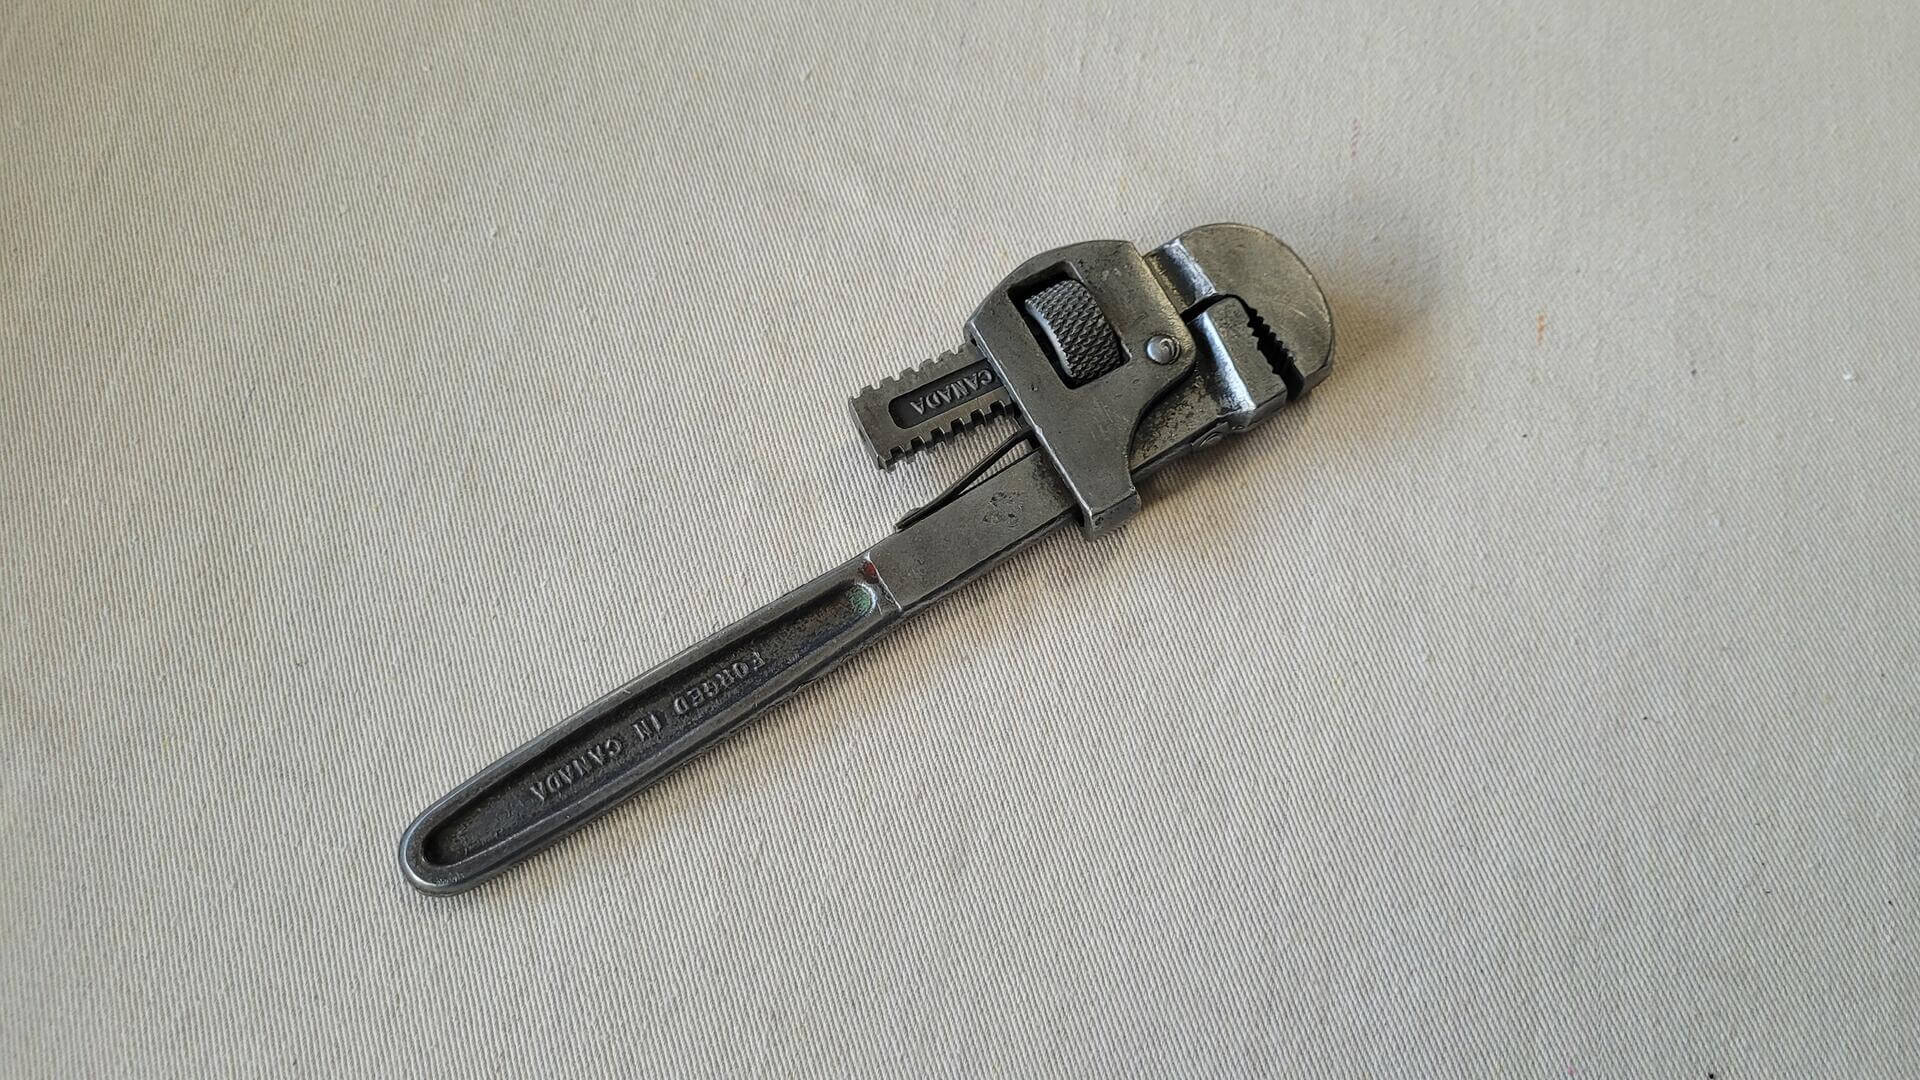 Antique Stillson type adjustable 10 inch pipe wrench forged by McKinnon Industries St. Catharines, ON. Vintage made in Canada collectible plumbing tools